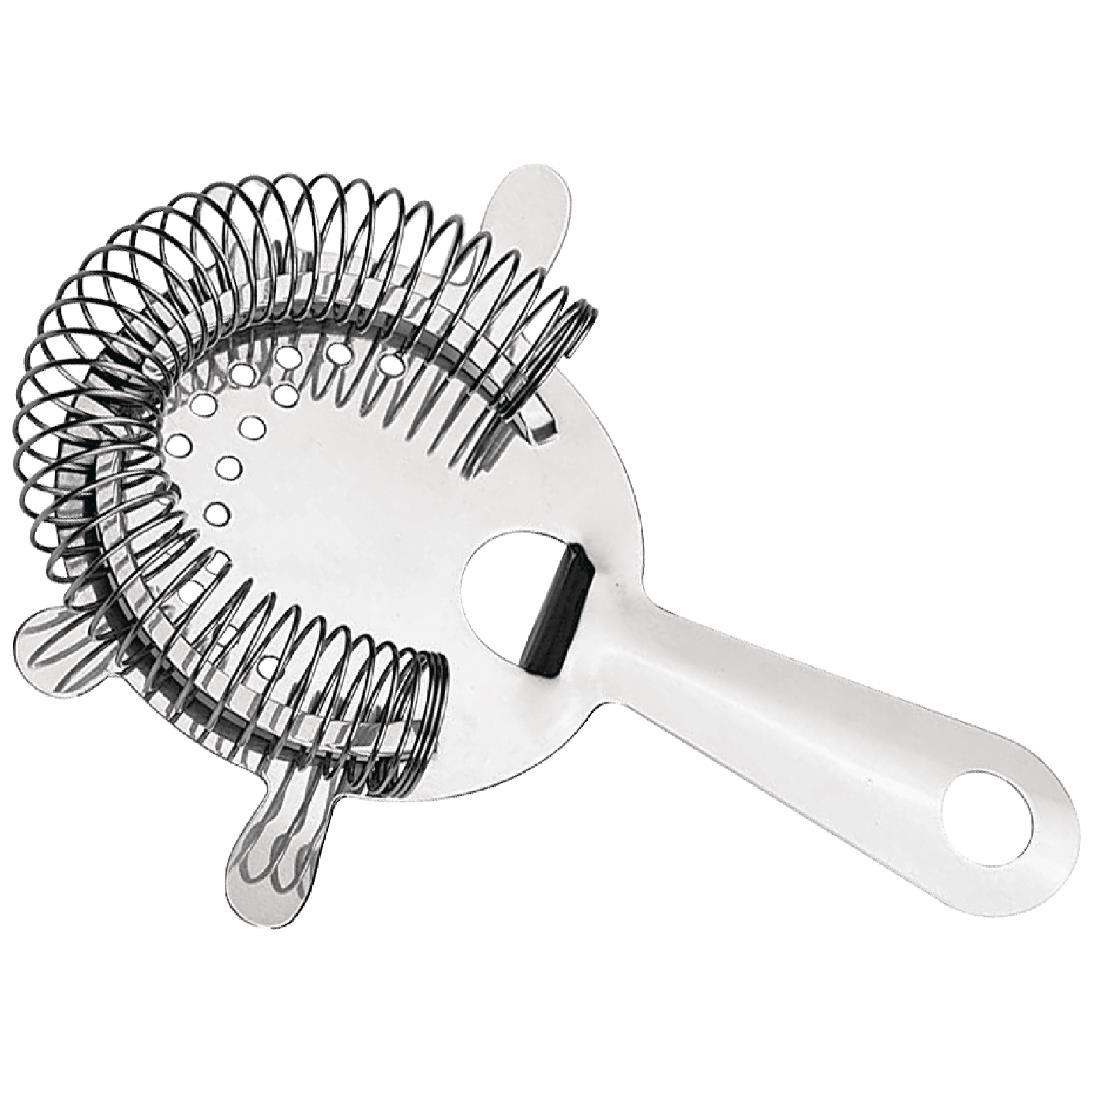 Beaumont Hawthorne Strainer 4 Prong - F976  - 2